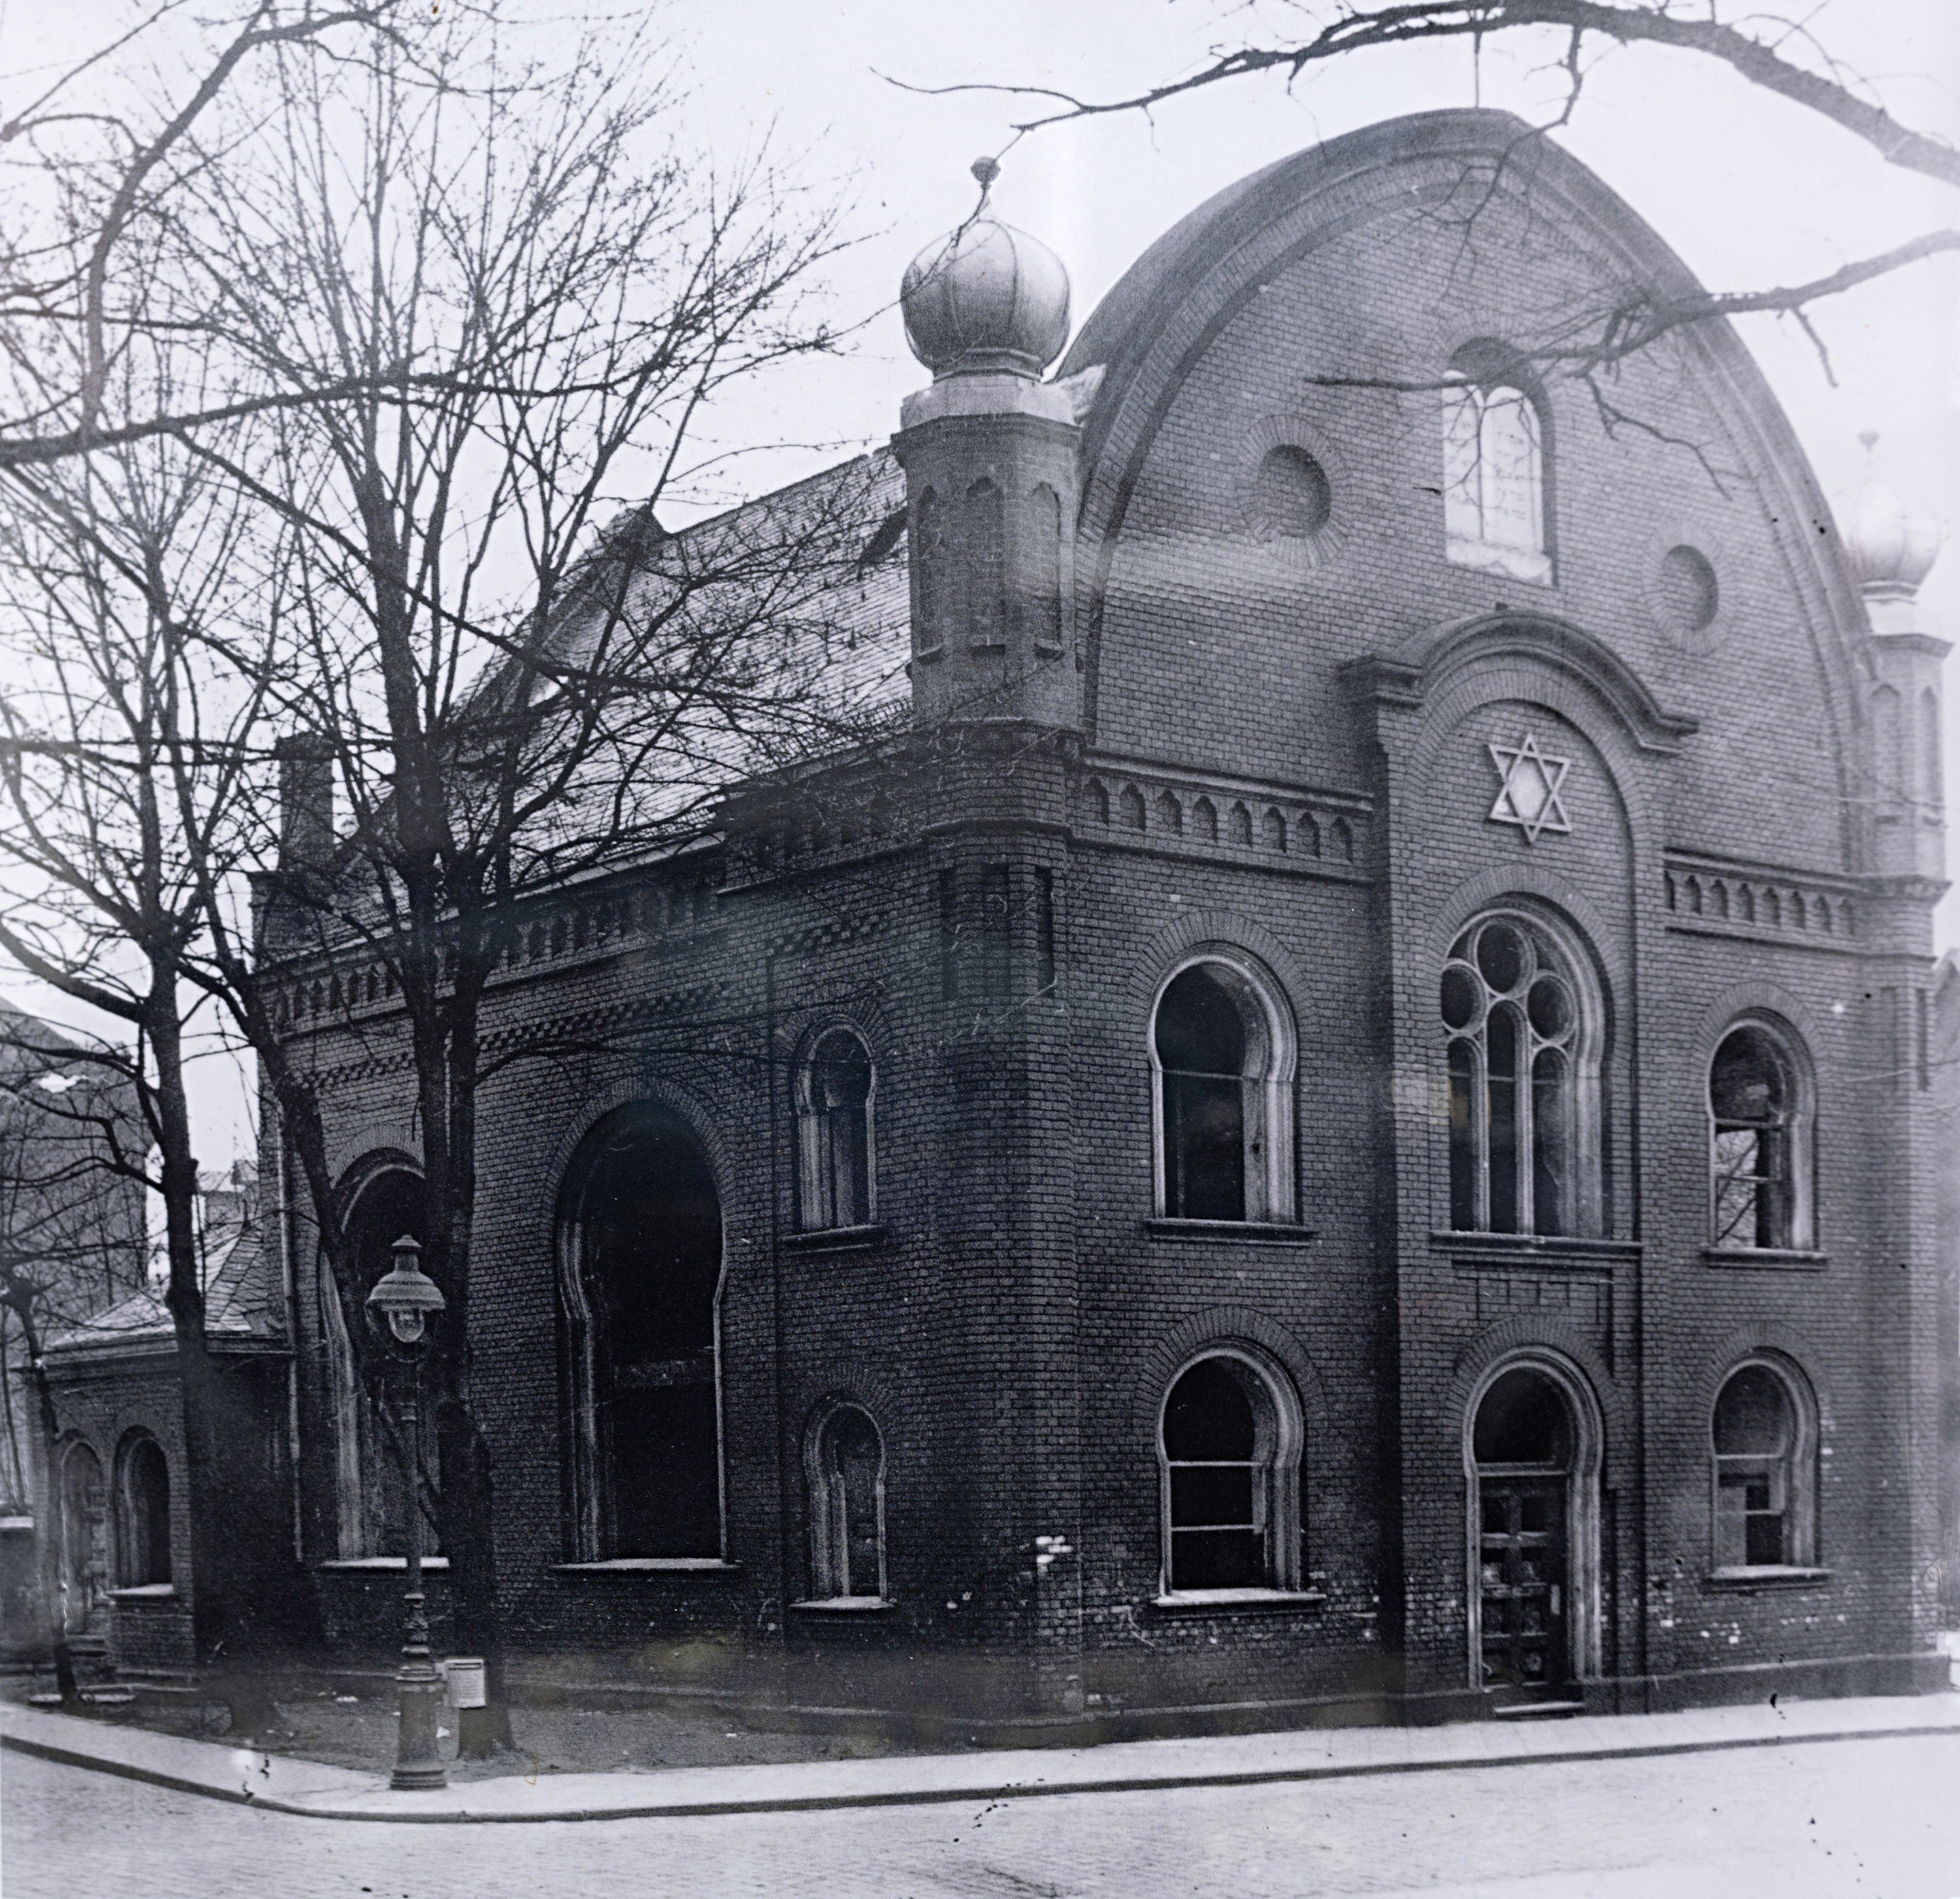 The synagogue in Frankfurt-Höchst after the Night of Broken Glass pogrom, 1938